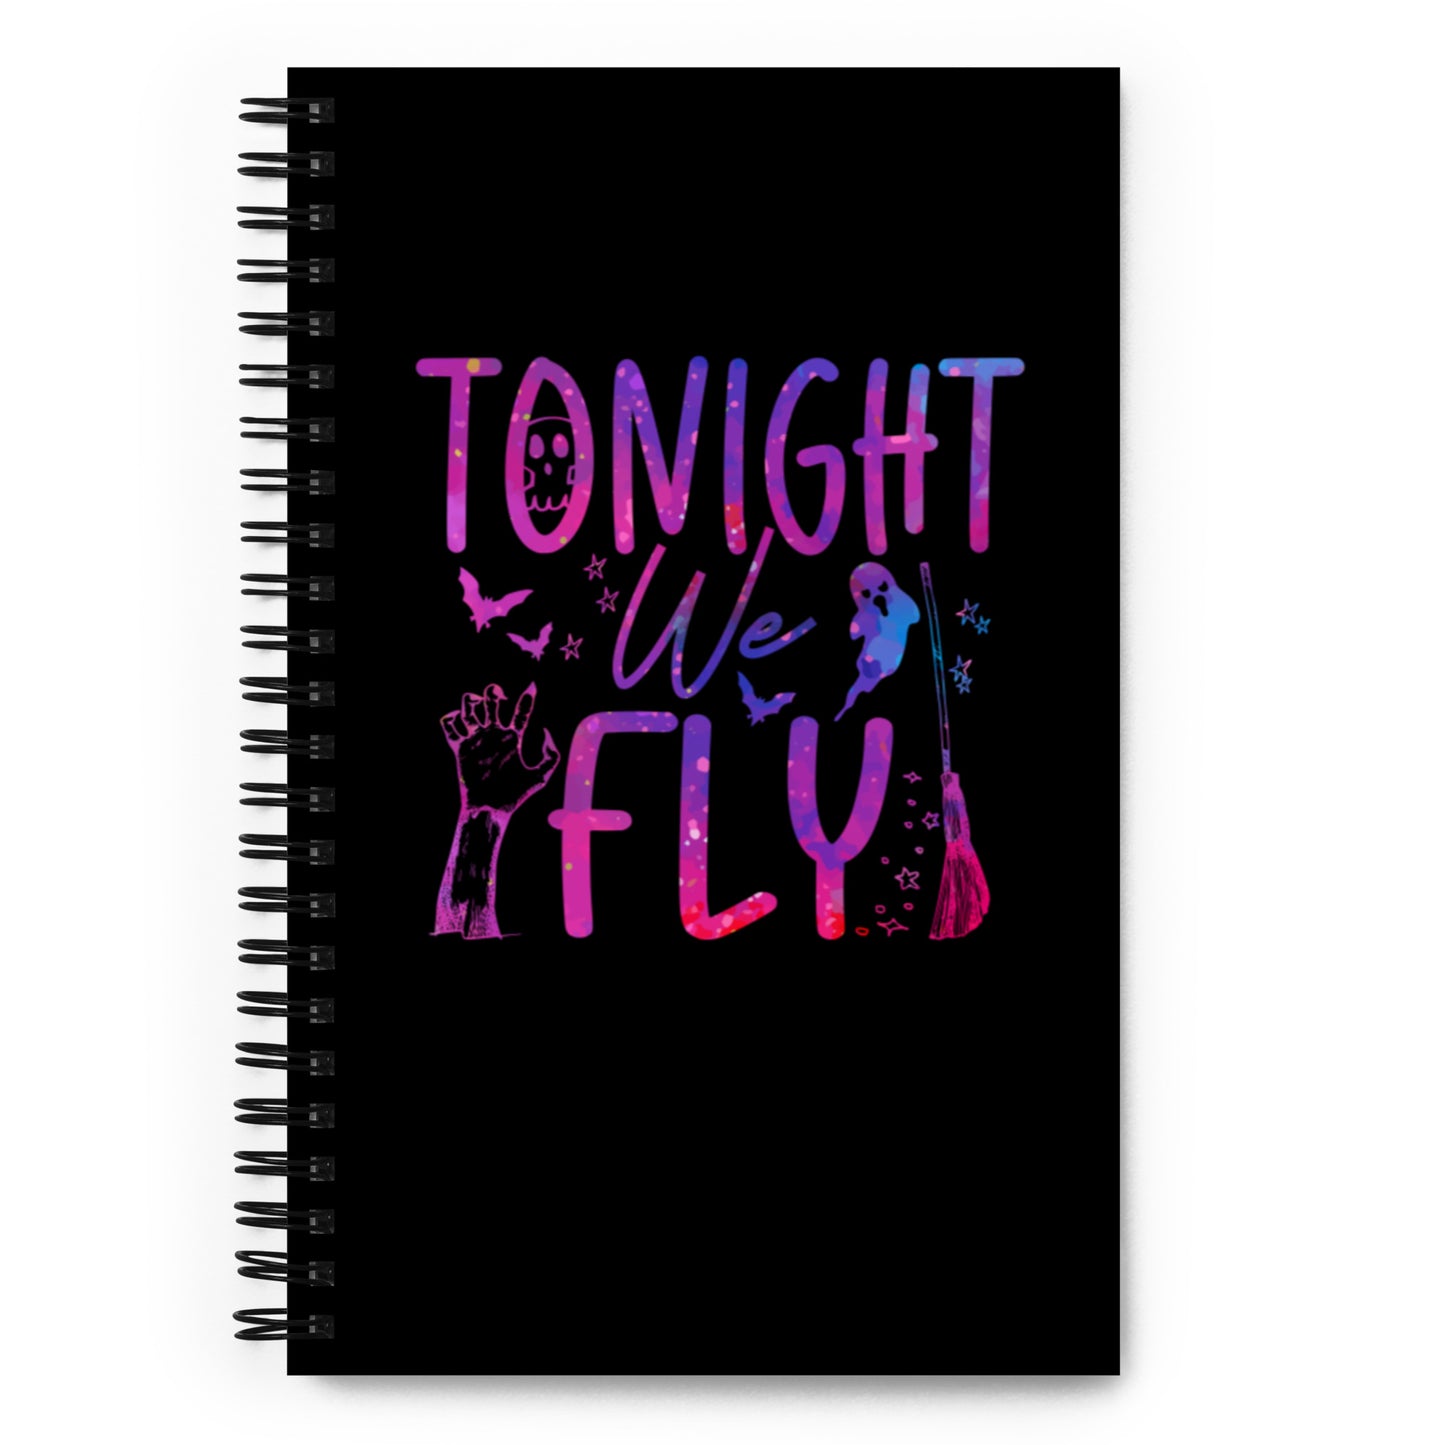 Tonight We Fly Spiral notebook